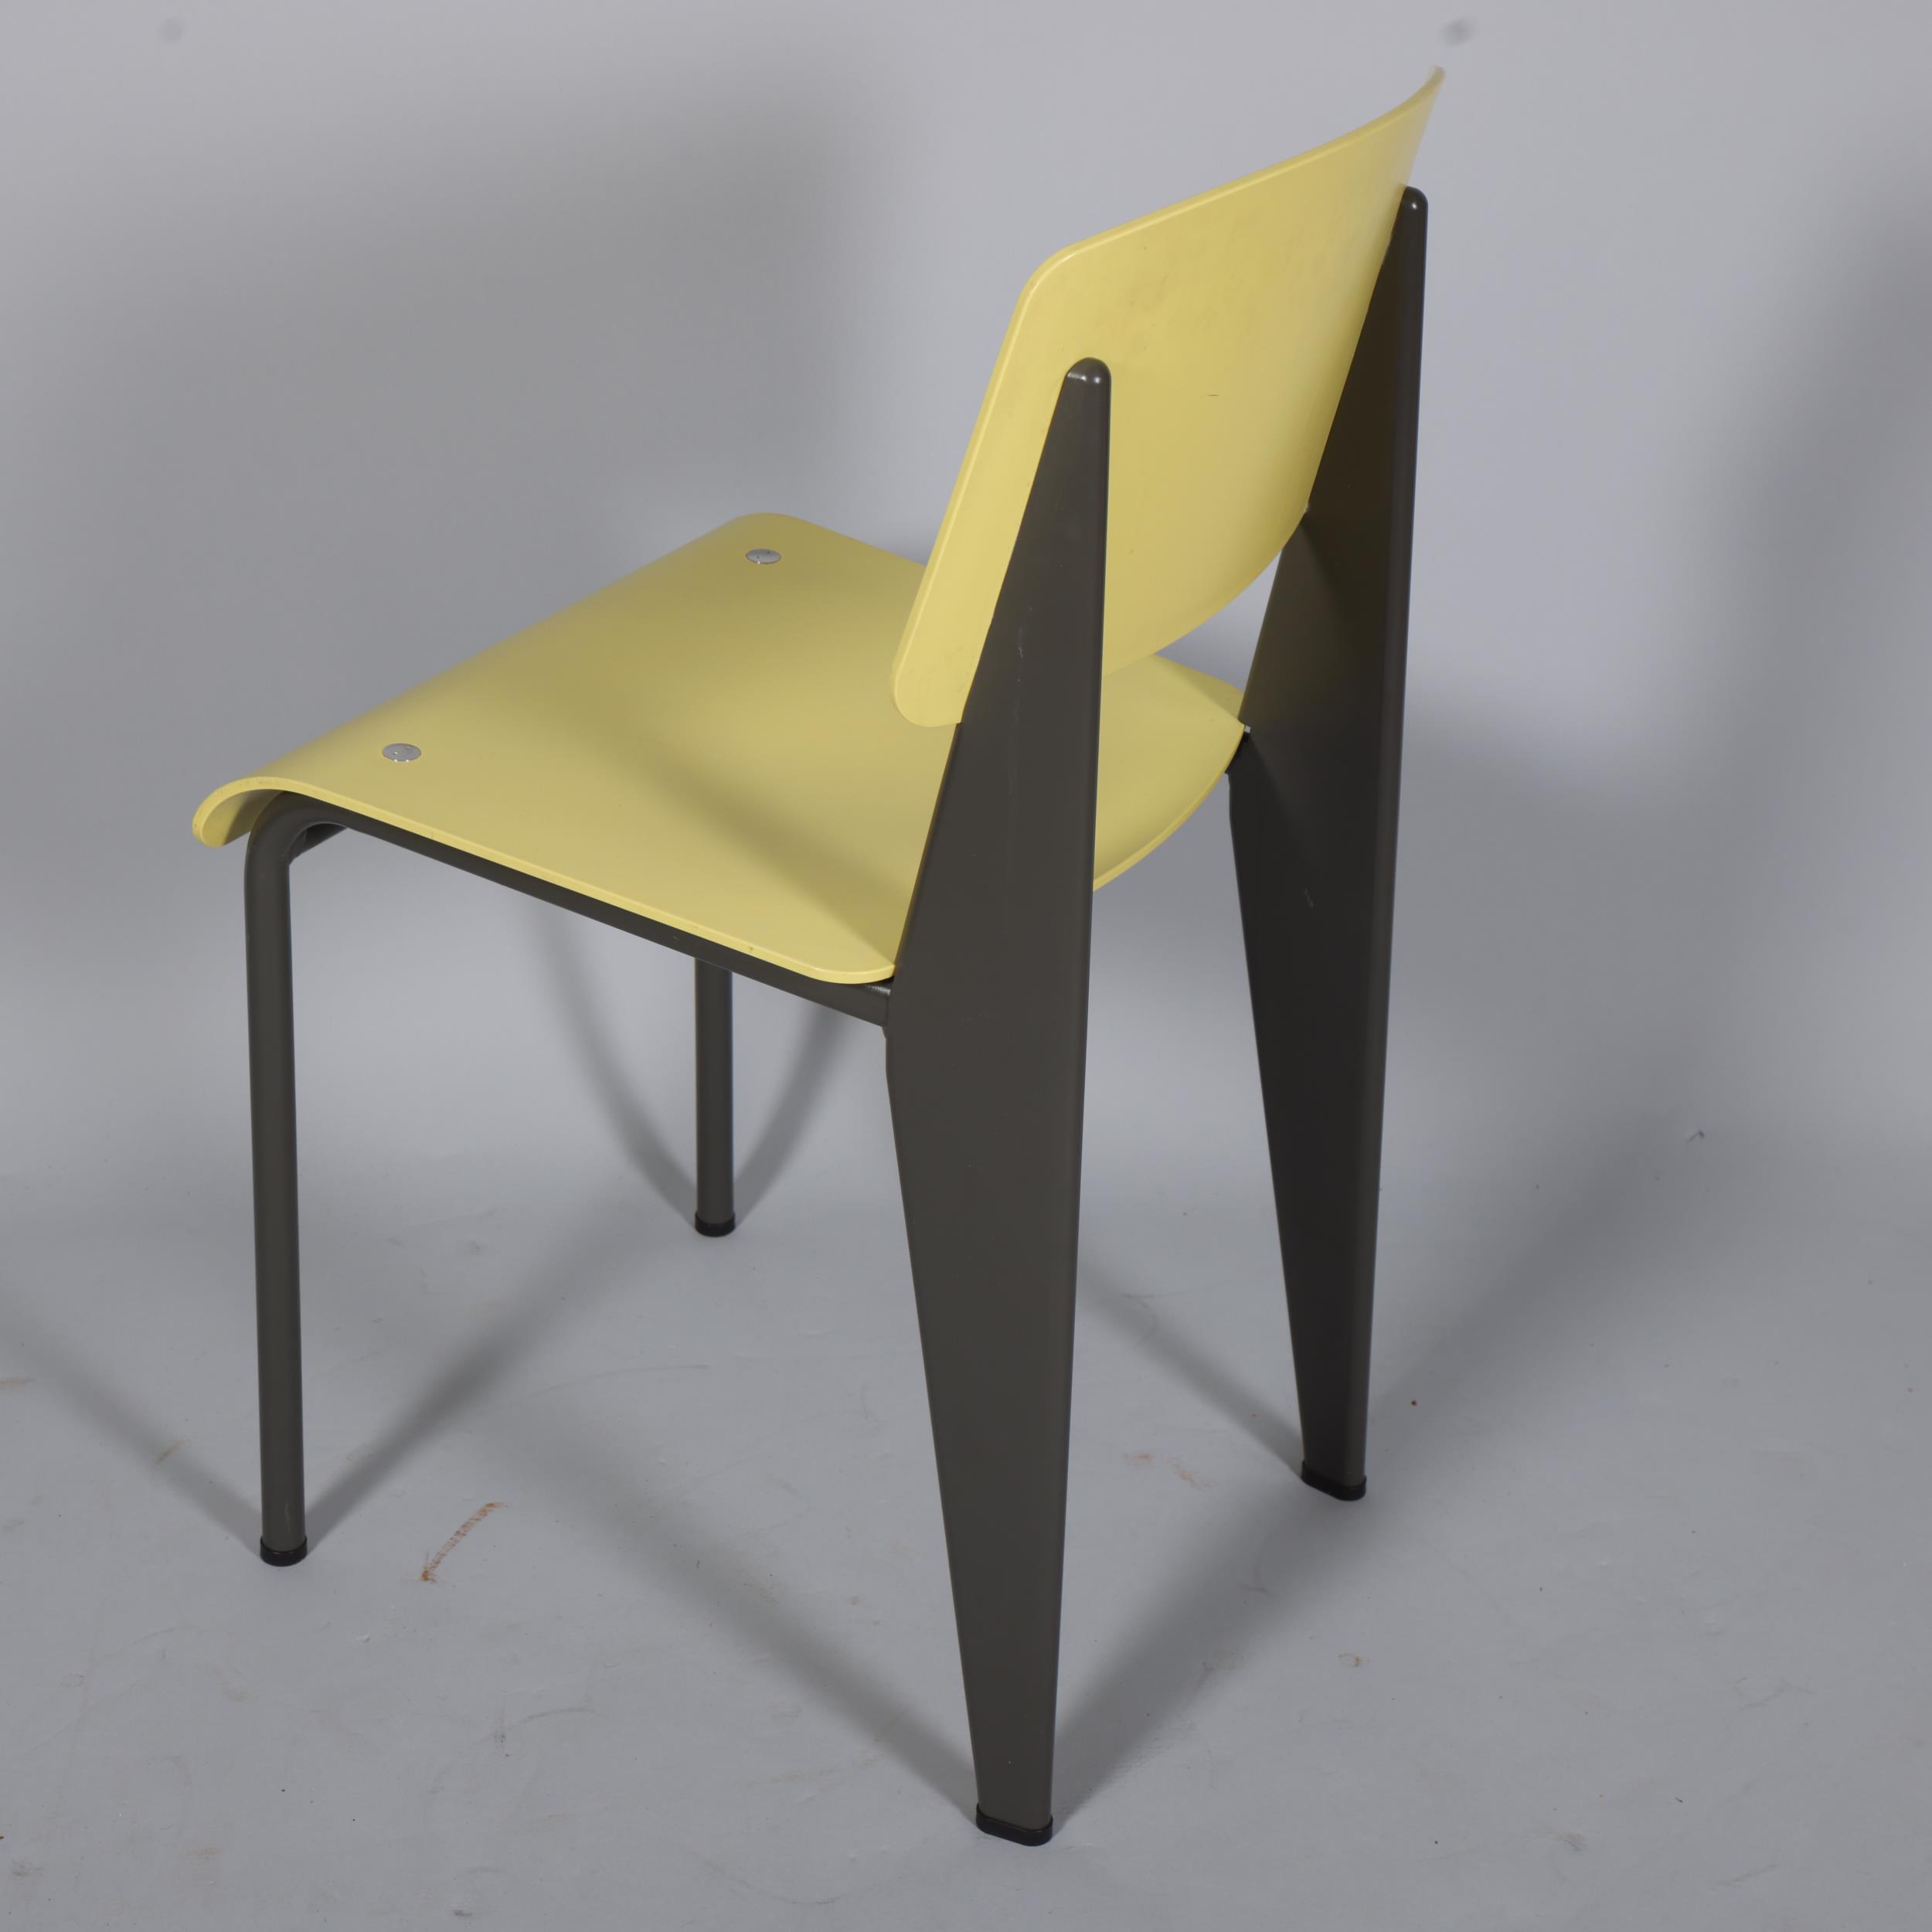 JEAN PROUVE - A Vitra Standard SP chair, citron seat on basalt grey base, with maker's labels and - Image 2 of 3